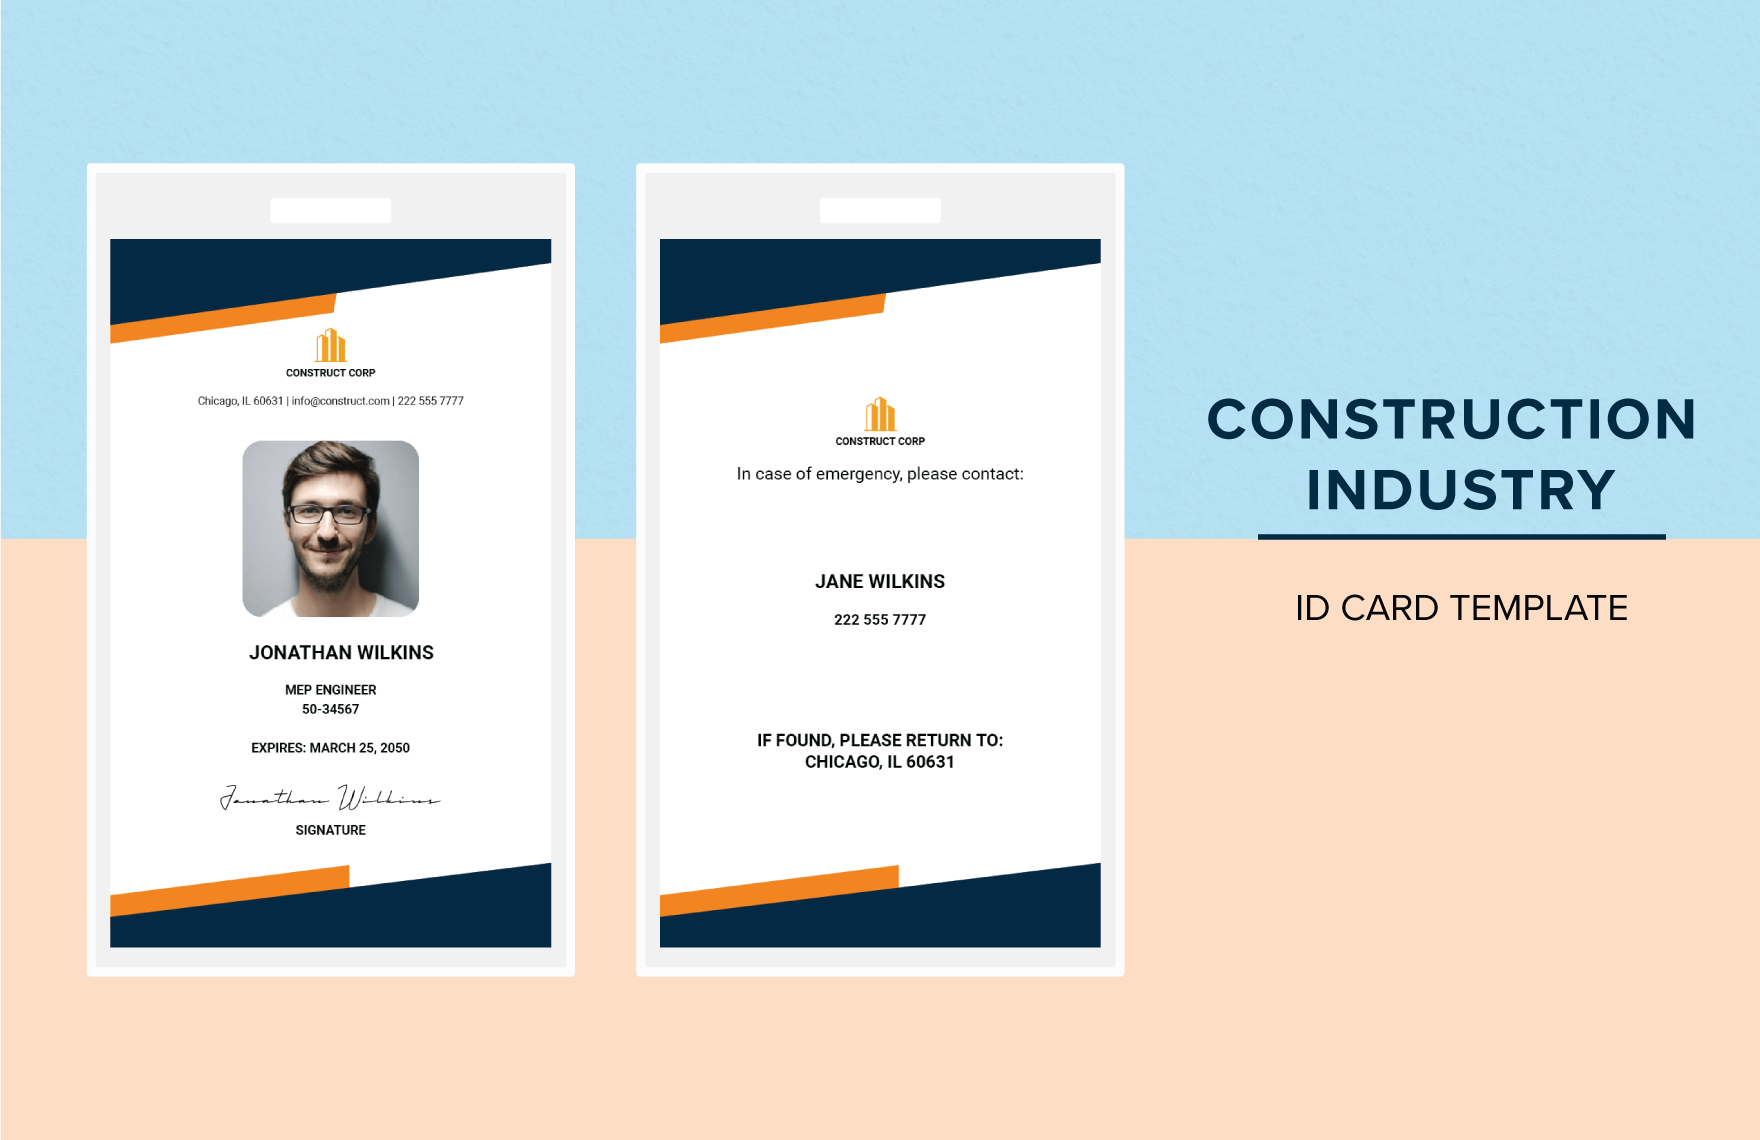 Construction Industry ID Card Template